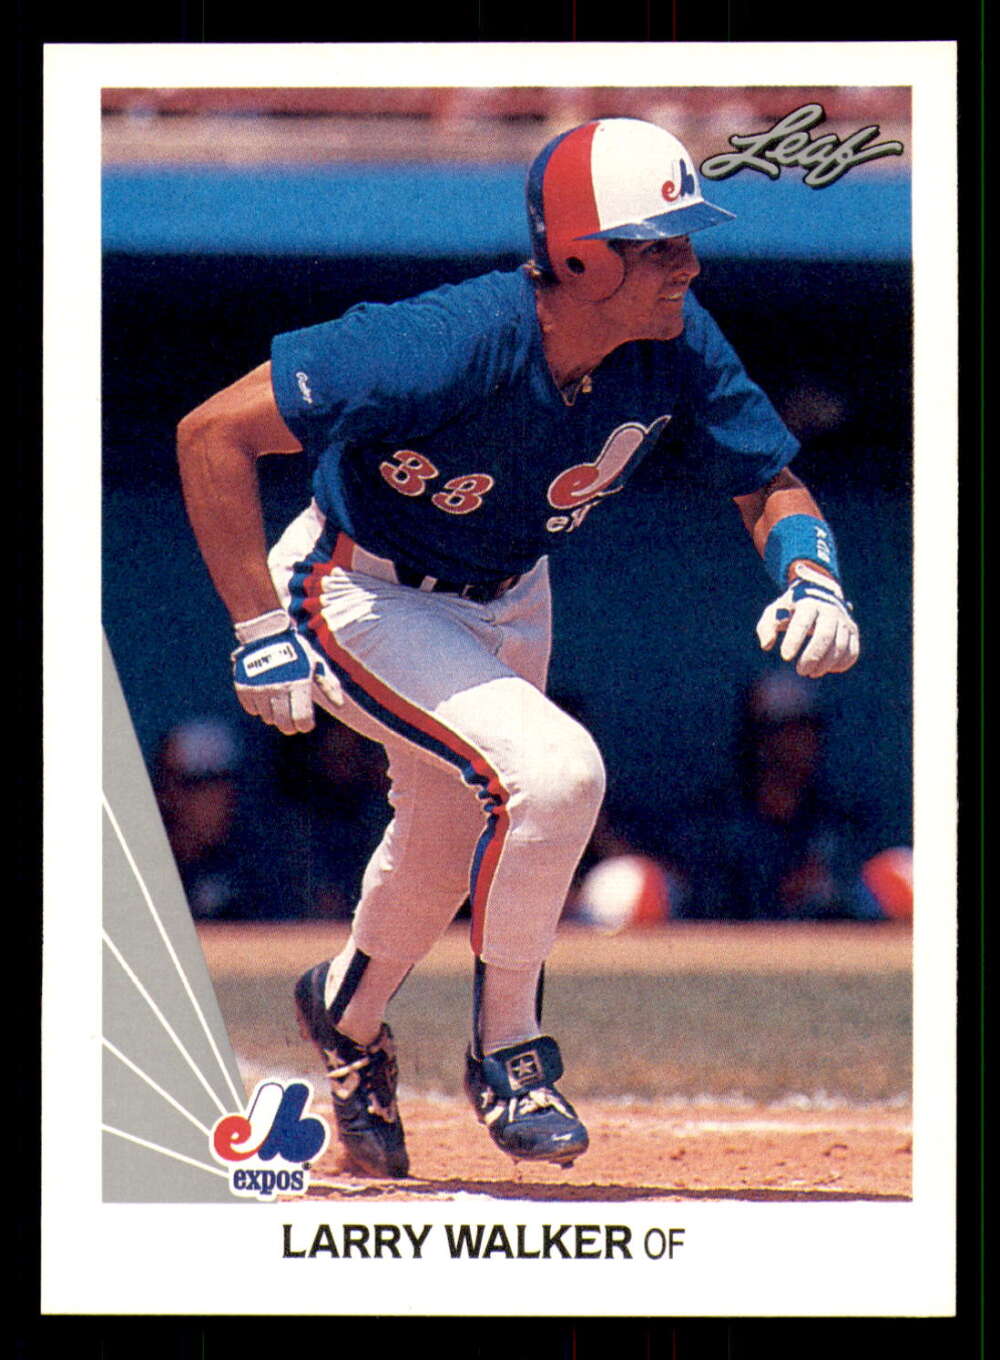 1990 Leaf Baseball #325 Larry Walker RC Rookie Montreal Expos  Official MLB Trading Card